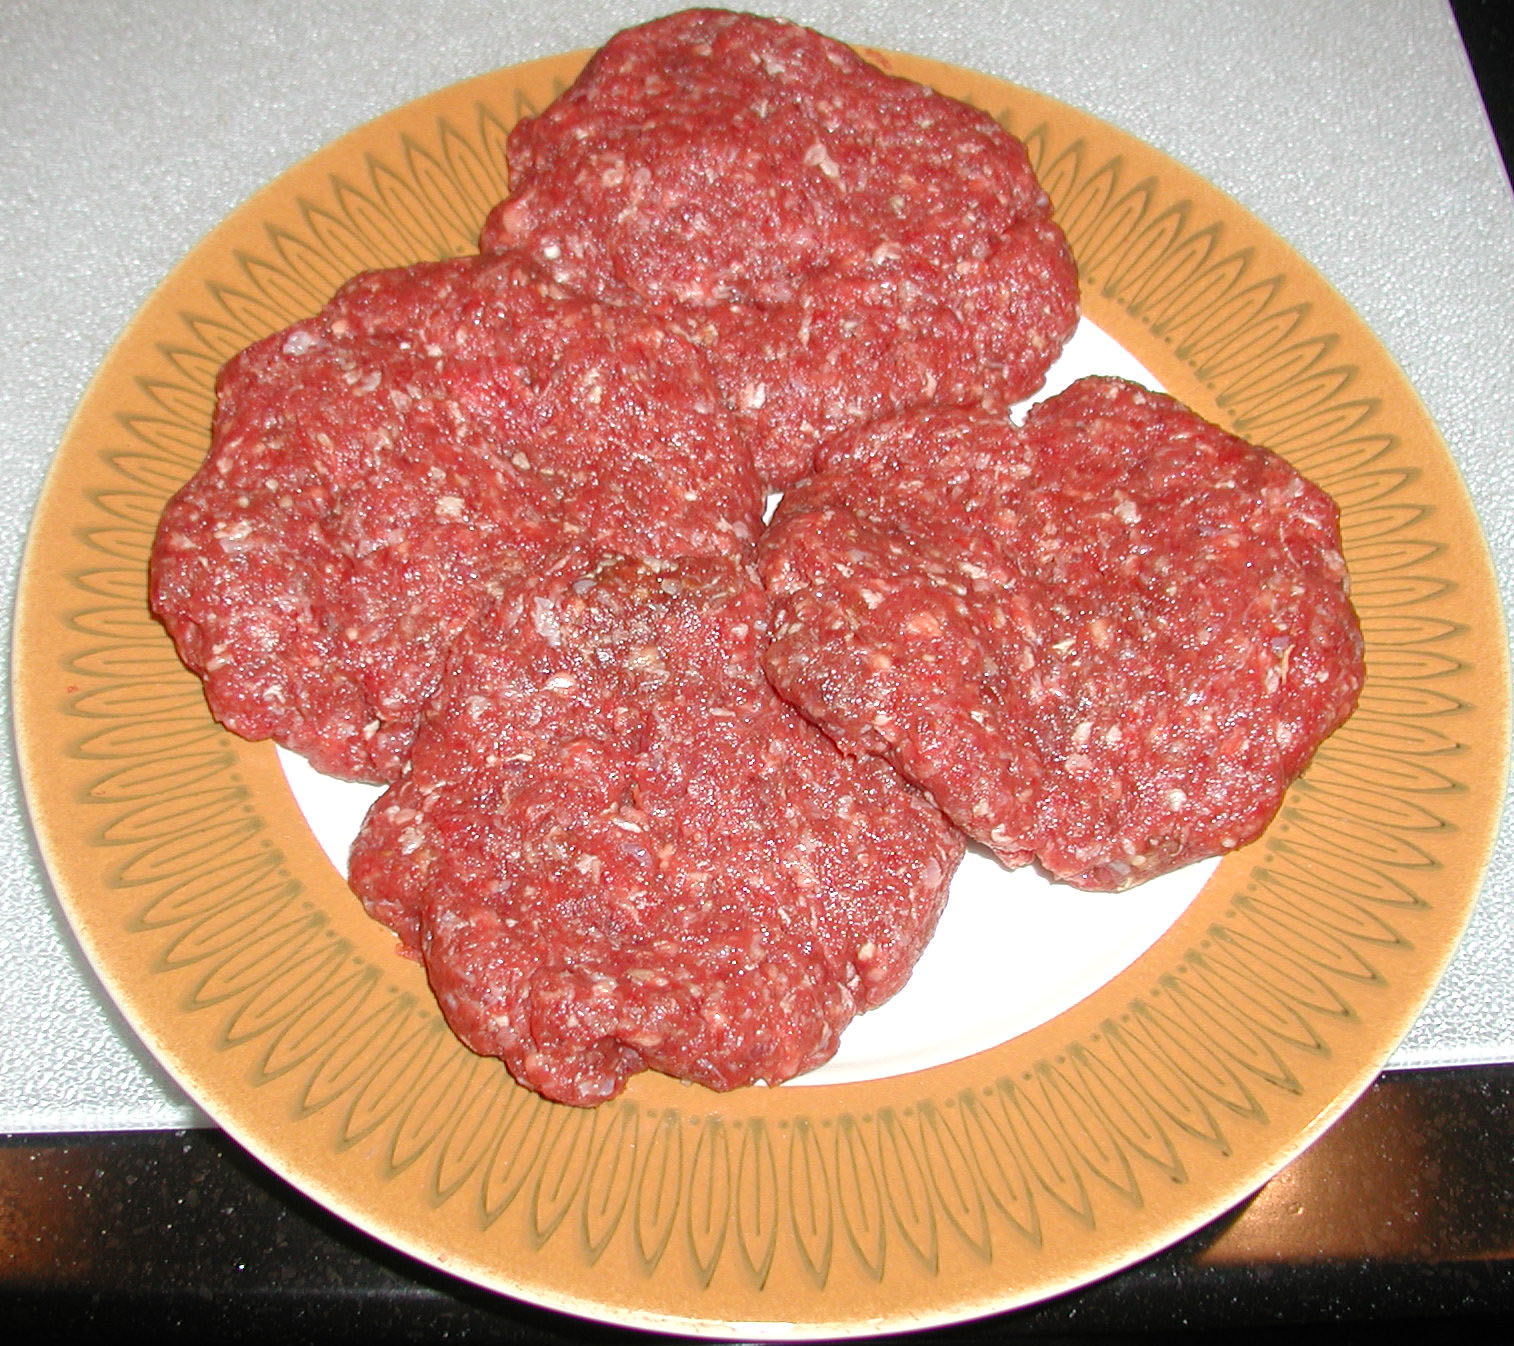 Bison burgers before cooking